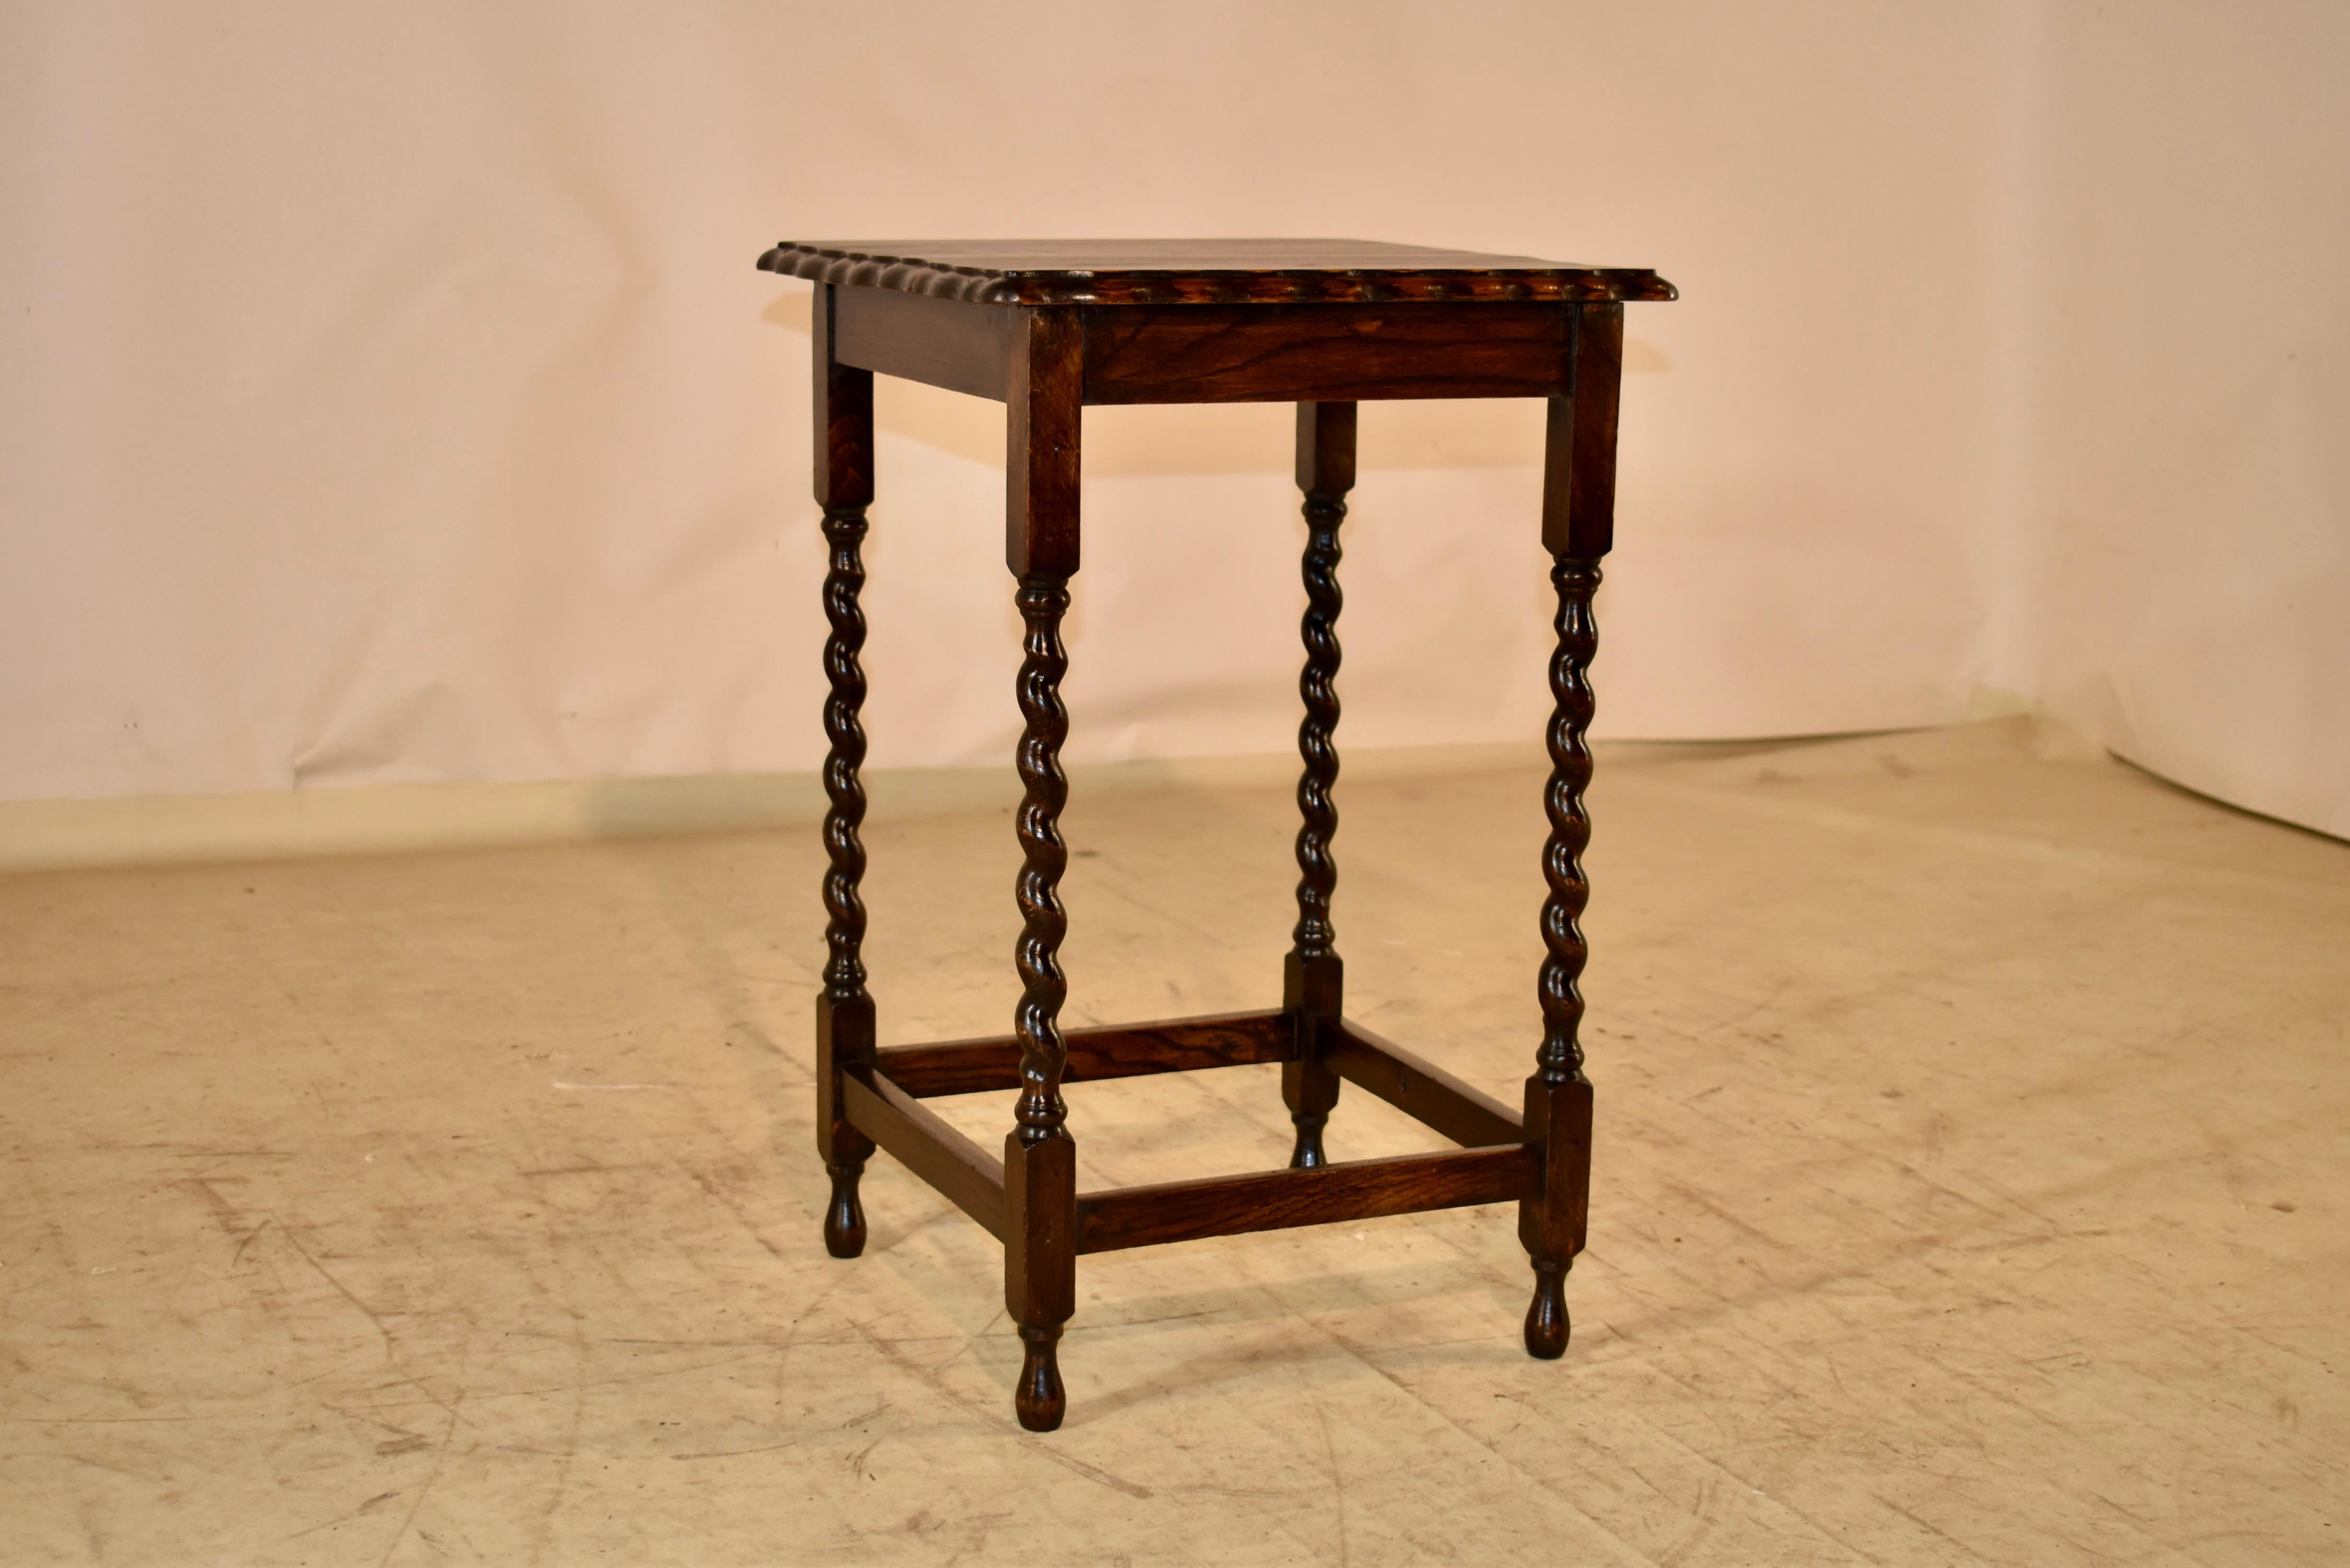 Circa 1900 Edwardian oak side table from England. The top has wonderful graining and is surrounded by a scalloped and beveled edge.  The top is over a simple apron and the table is supported on hand turned barley twist legs, joined by simple